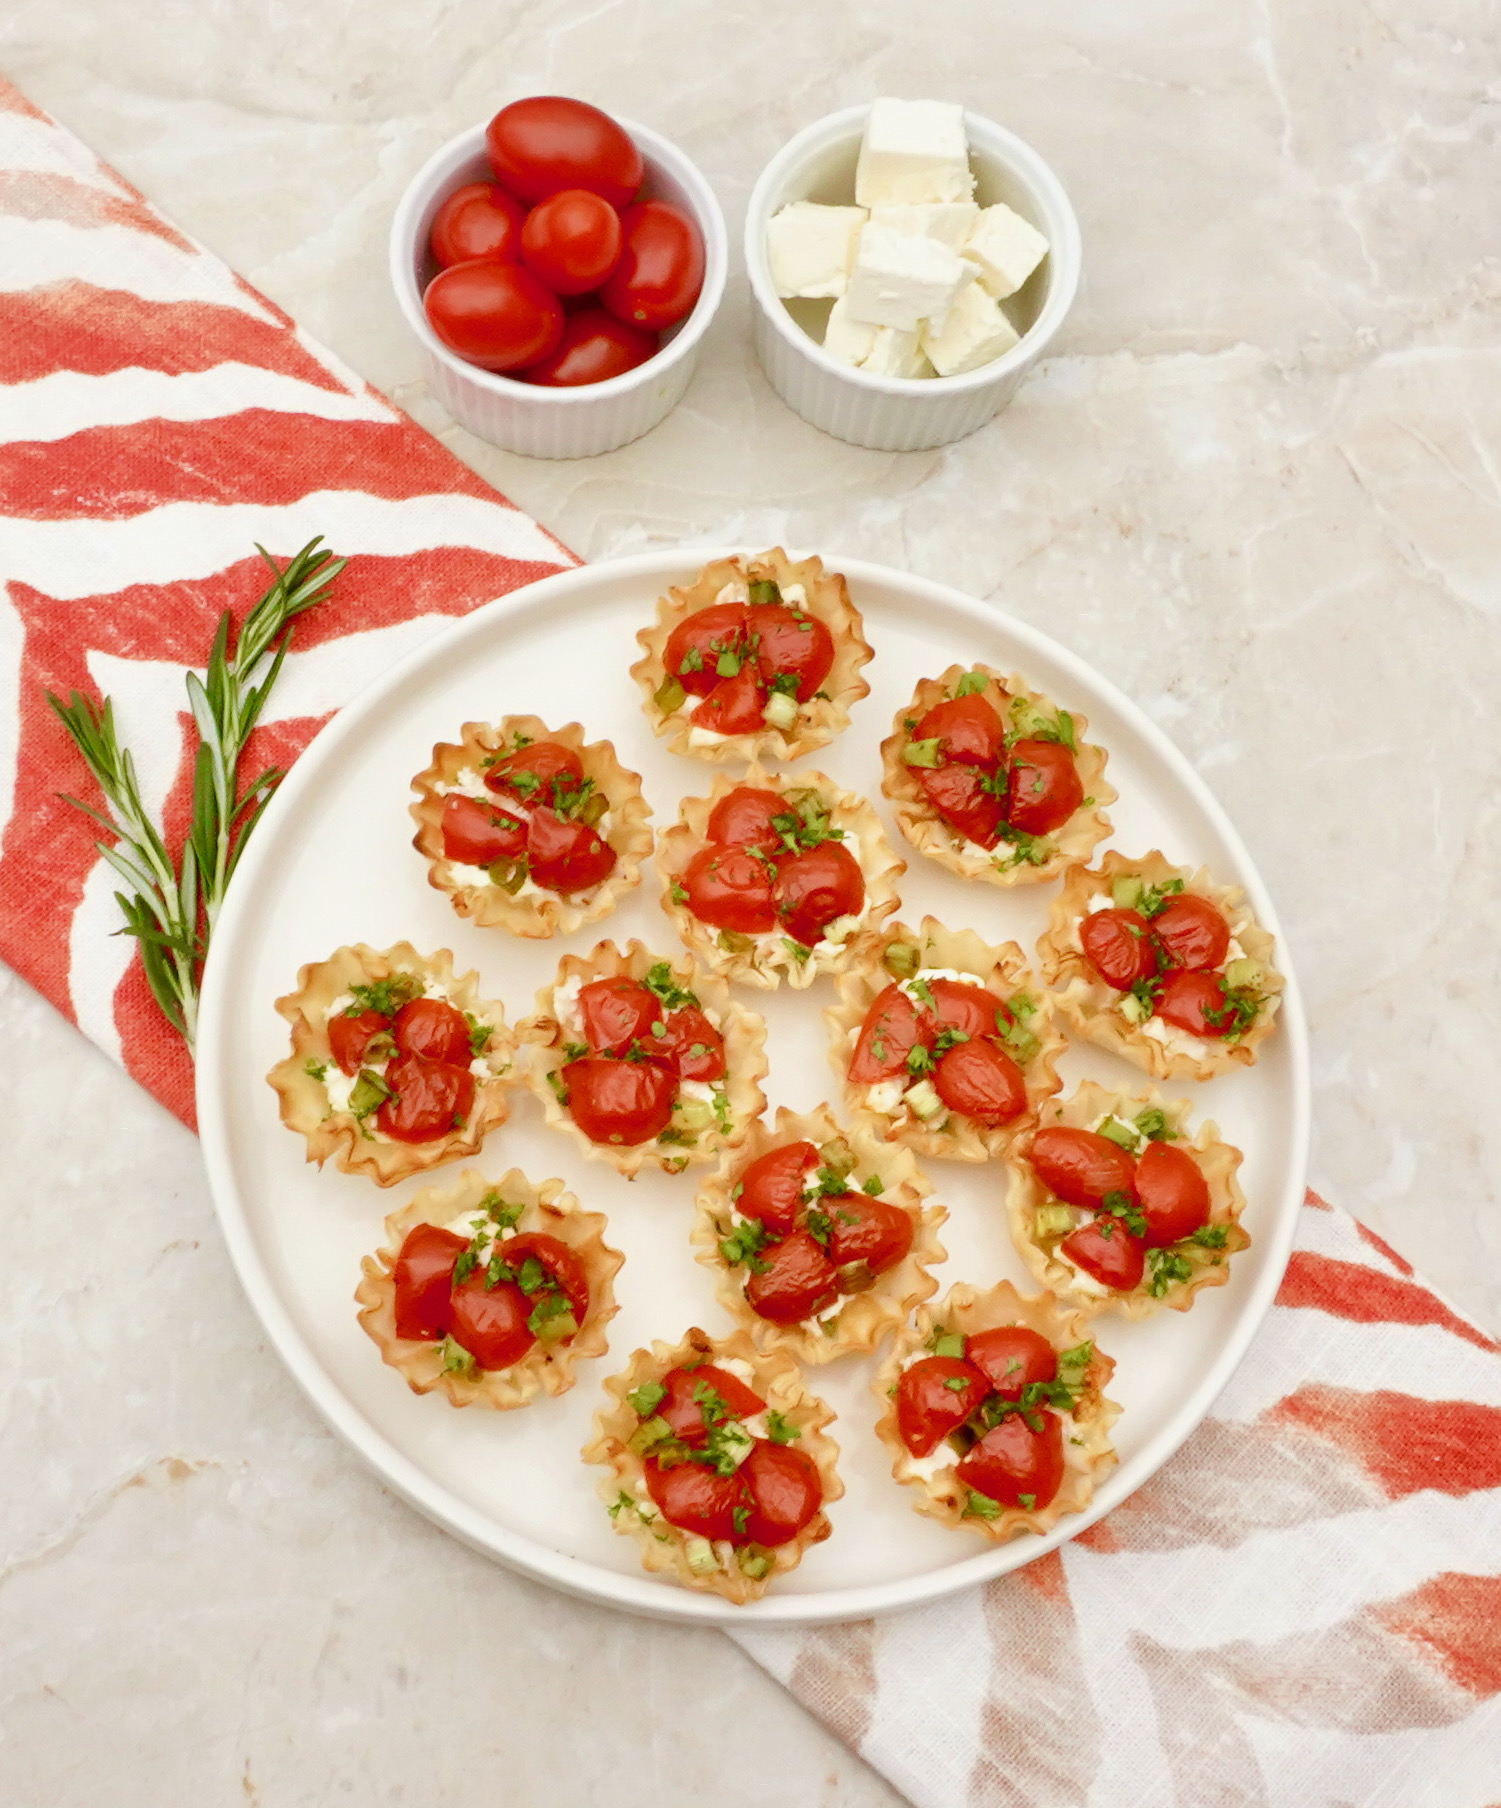 Tomato Feta Bites are simple, flavorful appetizers to make year round.